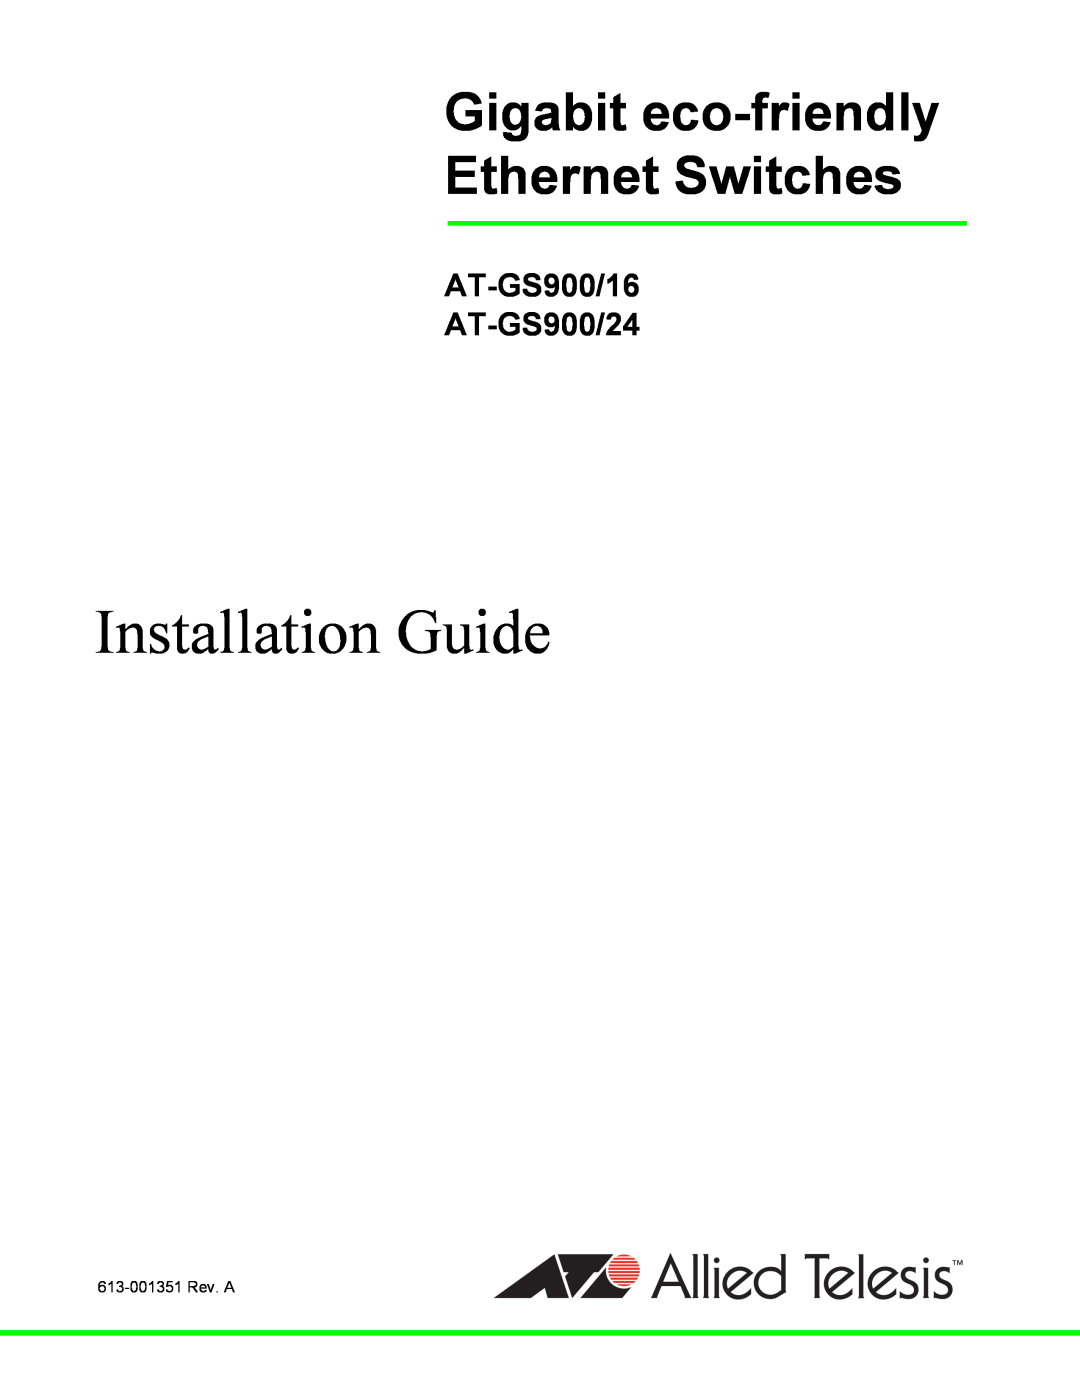 Allied Telesis manual Installation Guide, Gigabit eco-friendly Ethernet Switches, AT-GS900/16 AT-GS900/24 